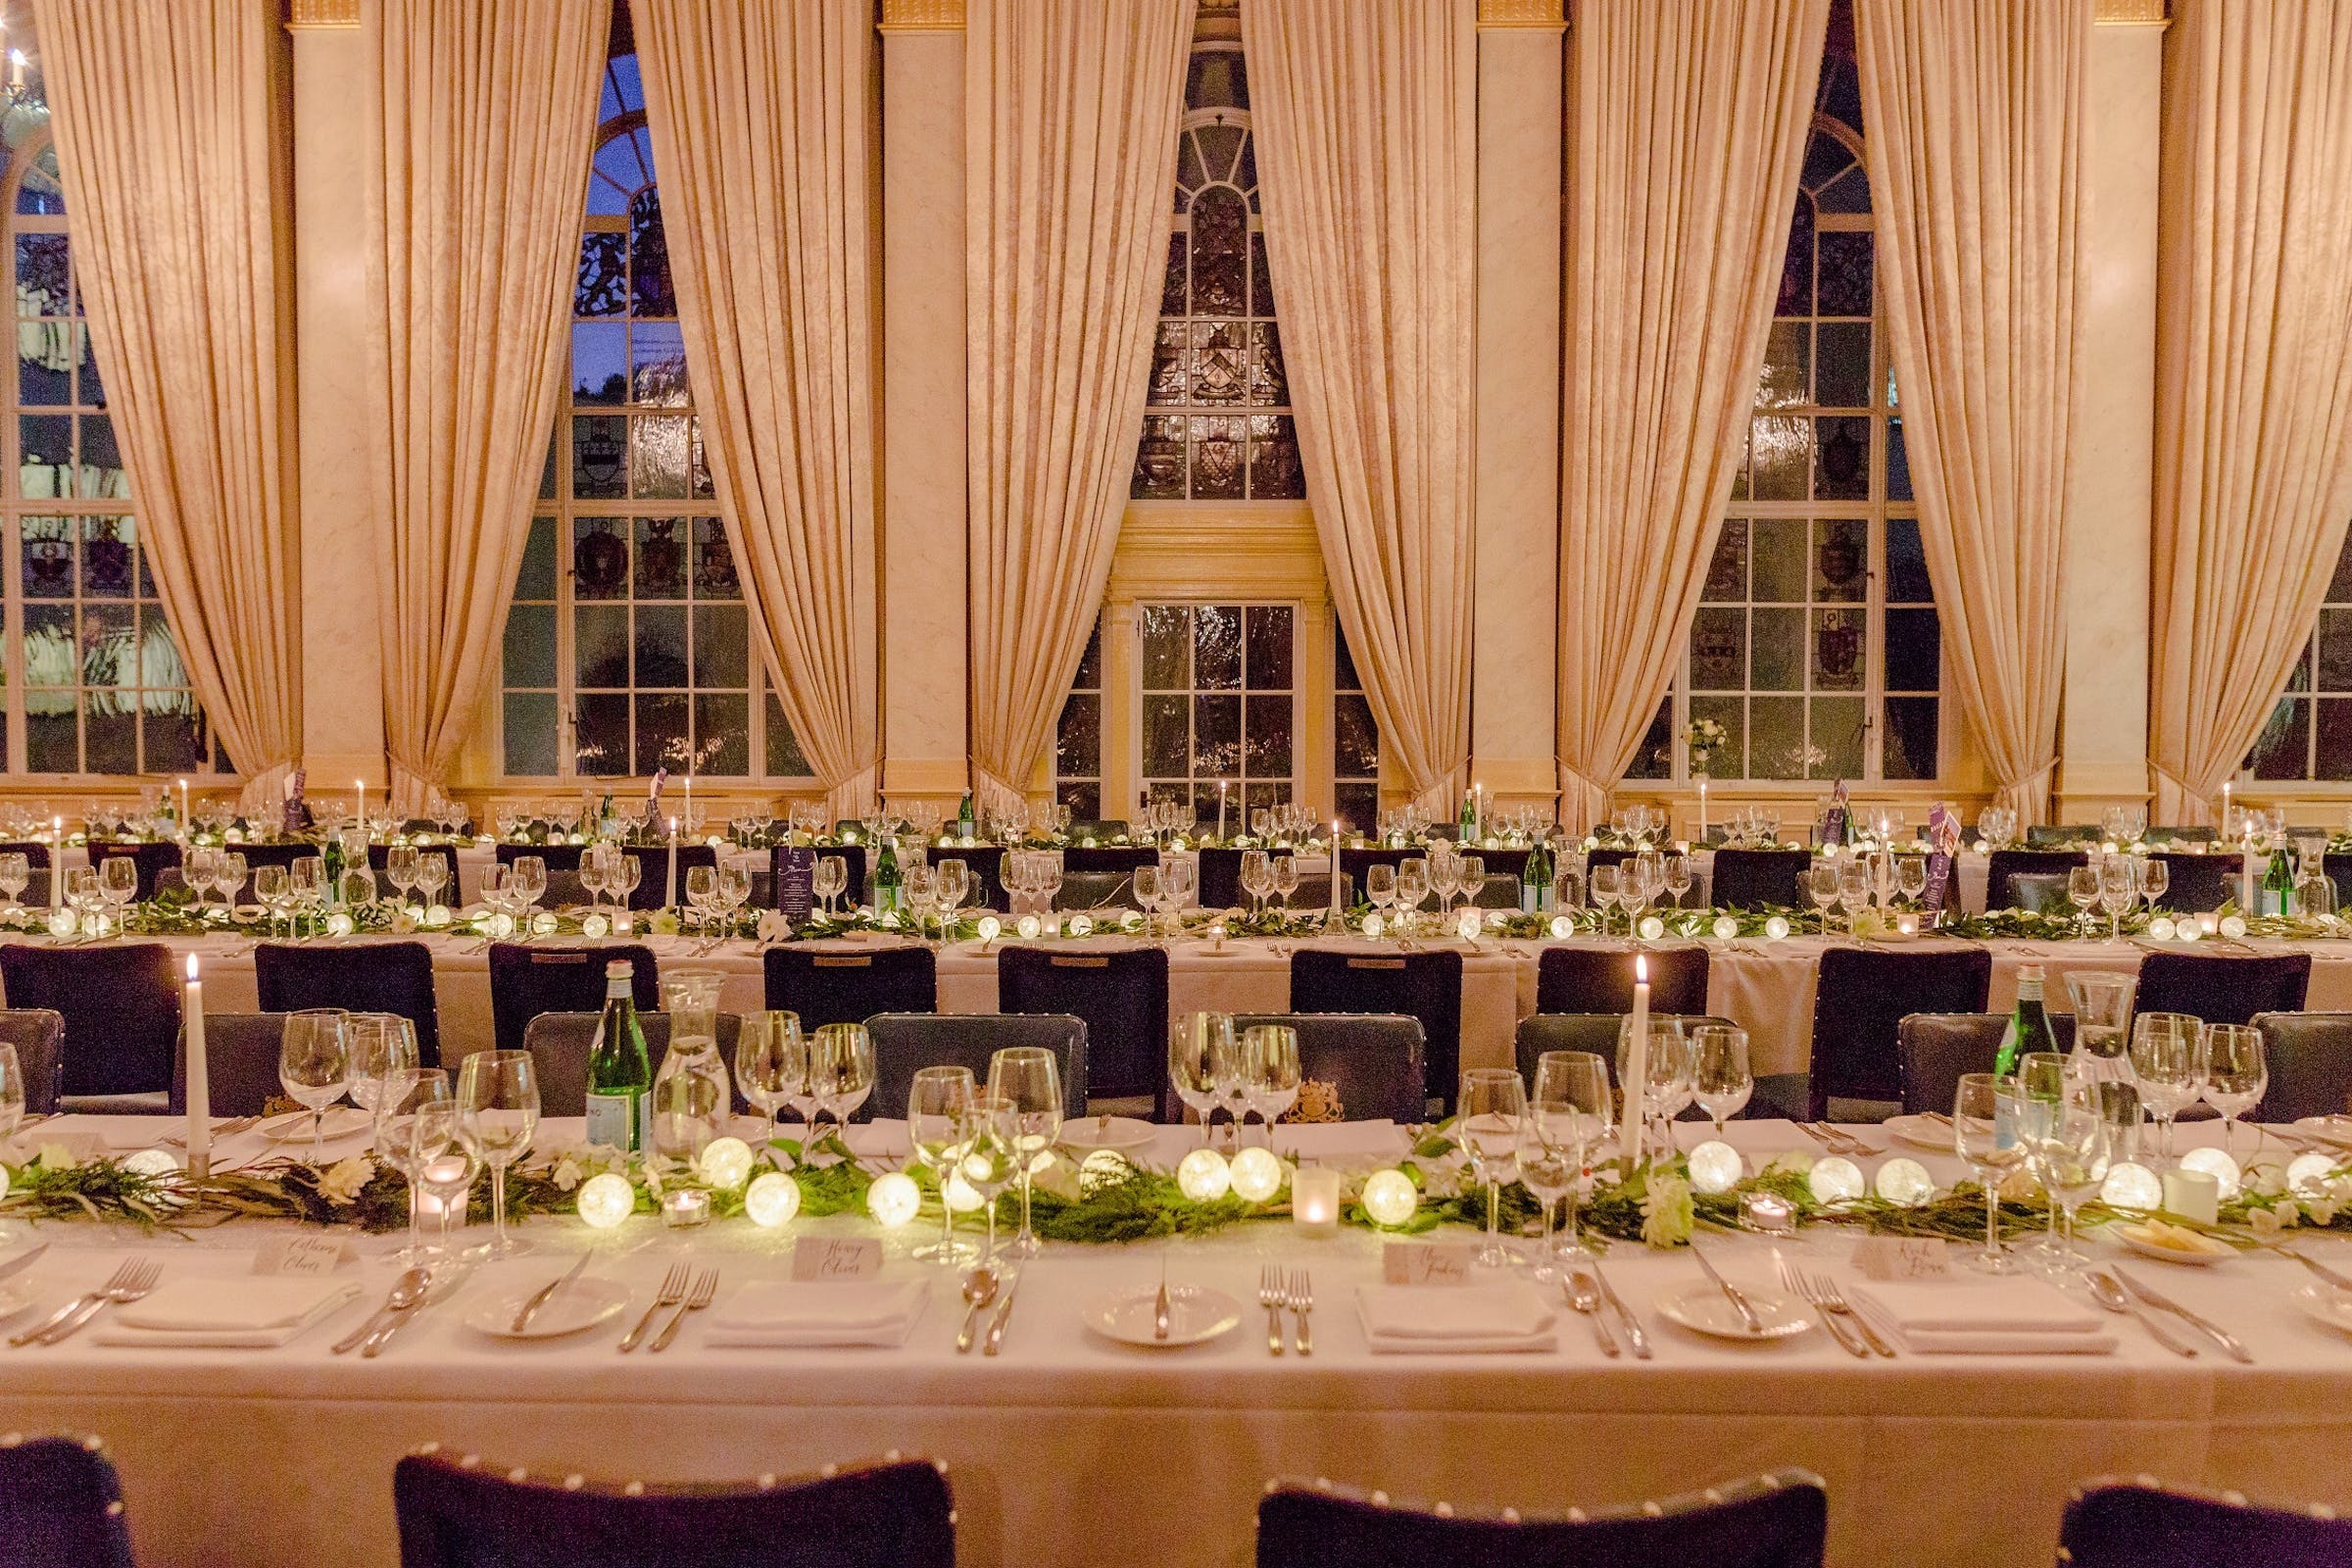 “A country house feel in the City of London” with elegant event spaces to suit any festive occasion.